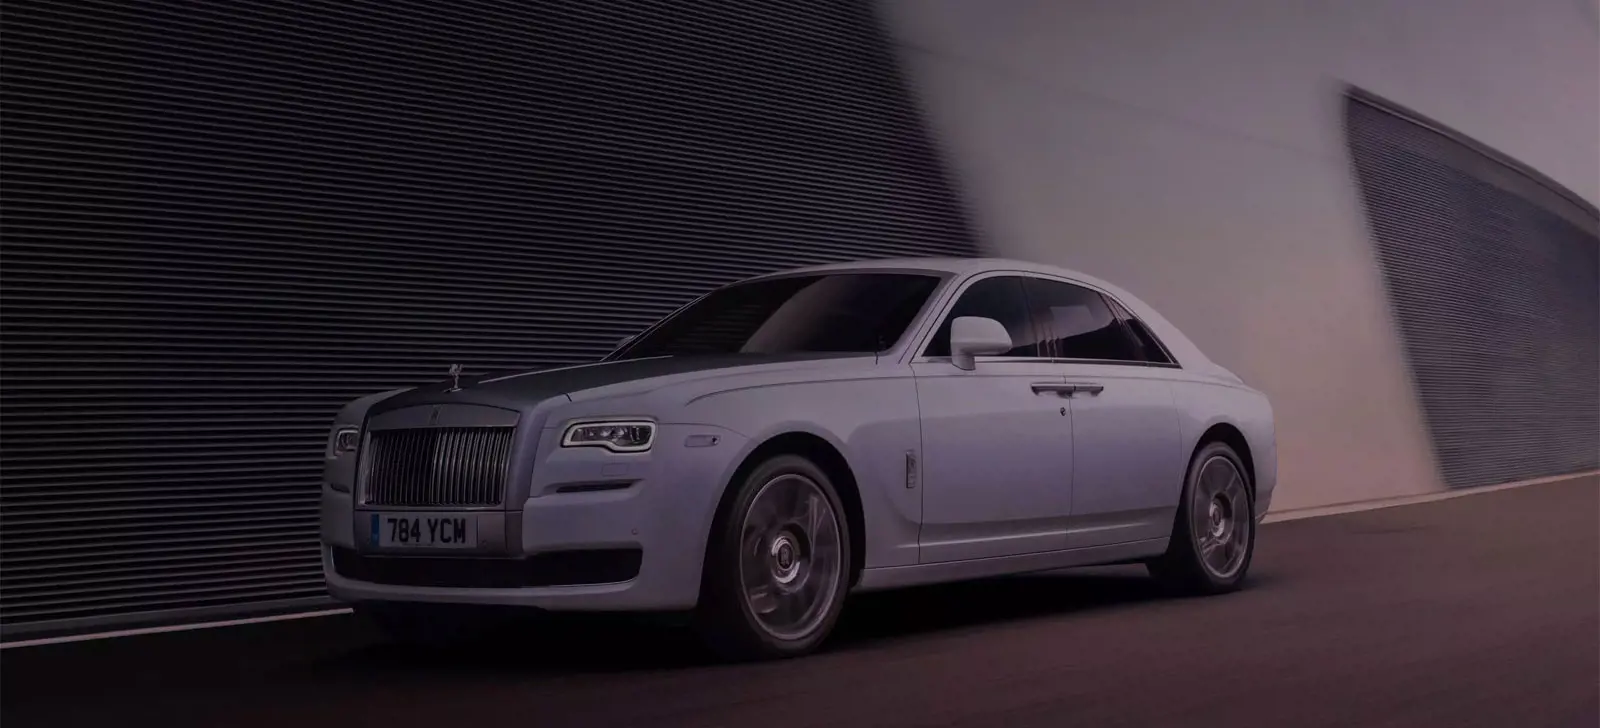 Rolls-Royce: Provenance Certified Pre-Owned Cars